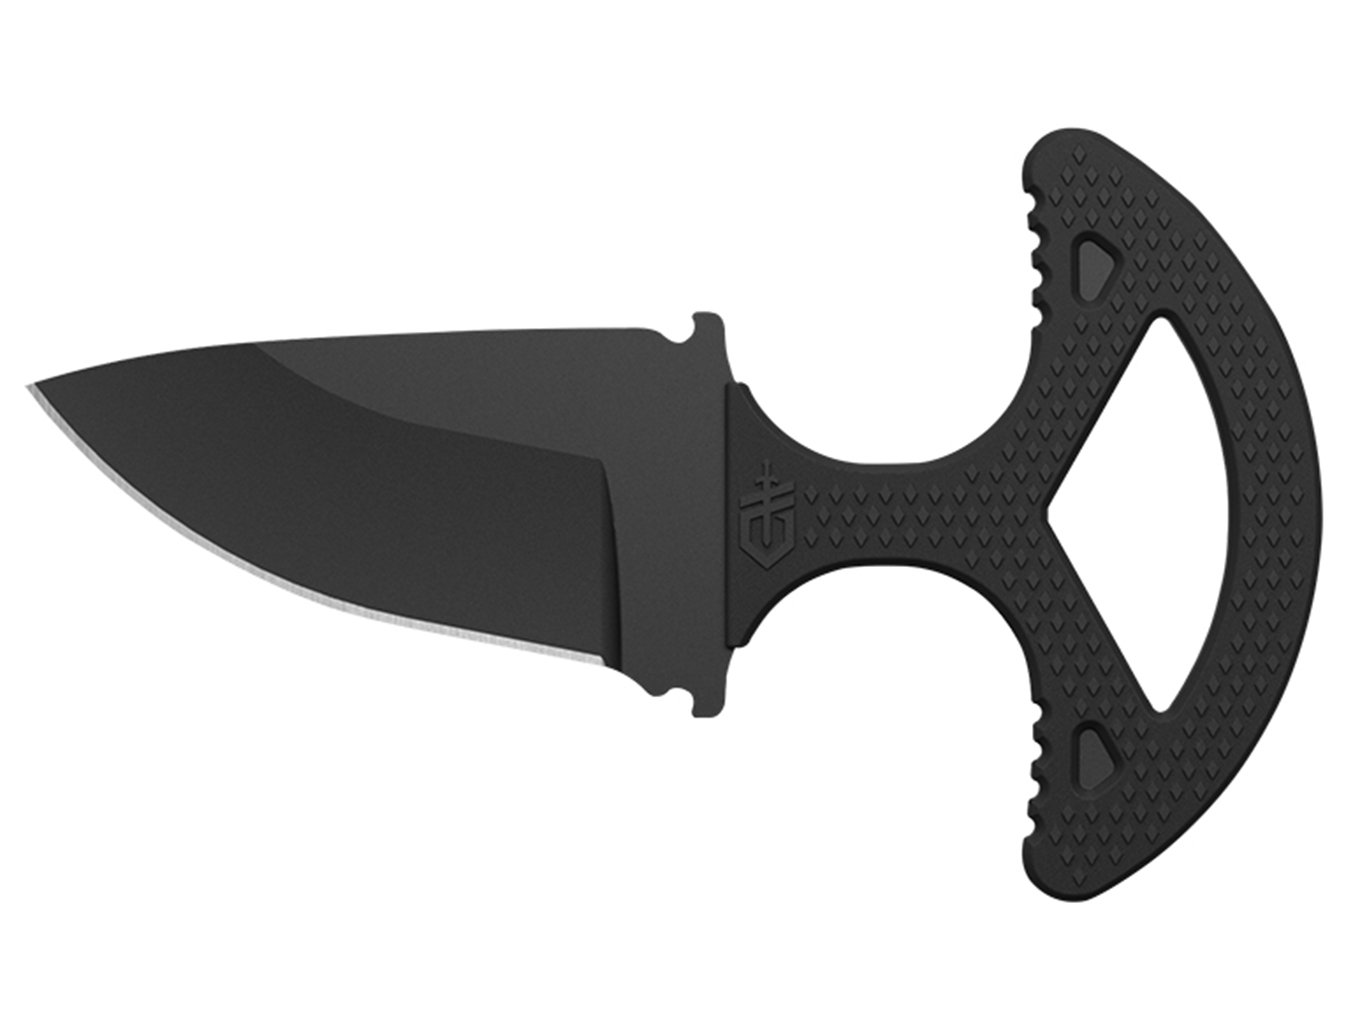 GERBER BLADES GHOSTRIKE PUNCH KNIFE FIXED BLADE 2.5 INCH CLAM